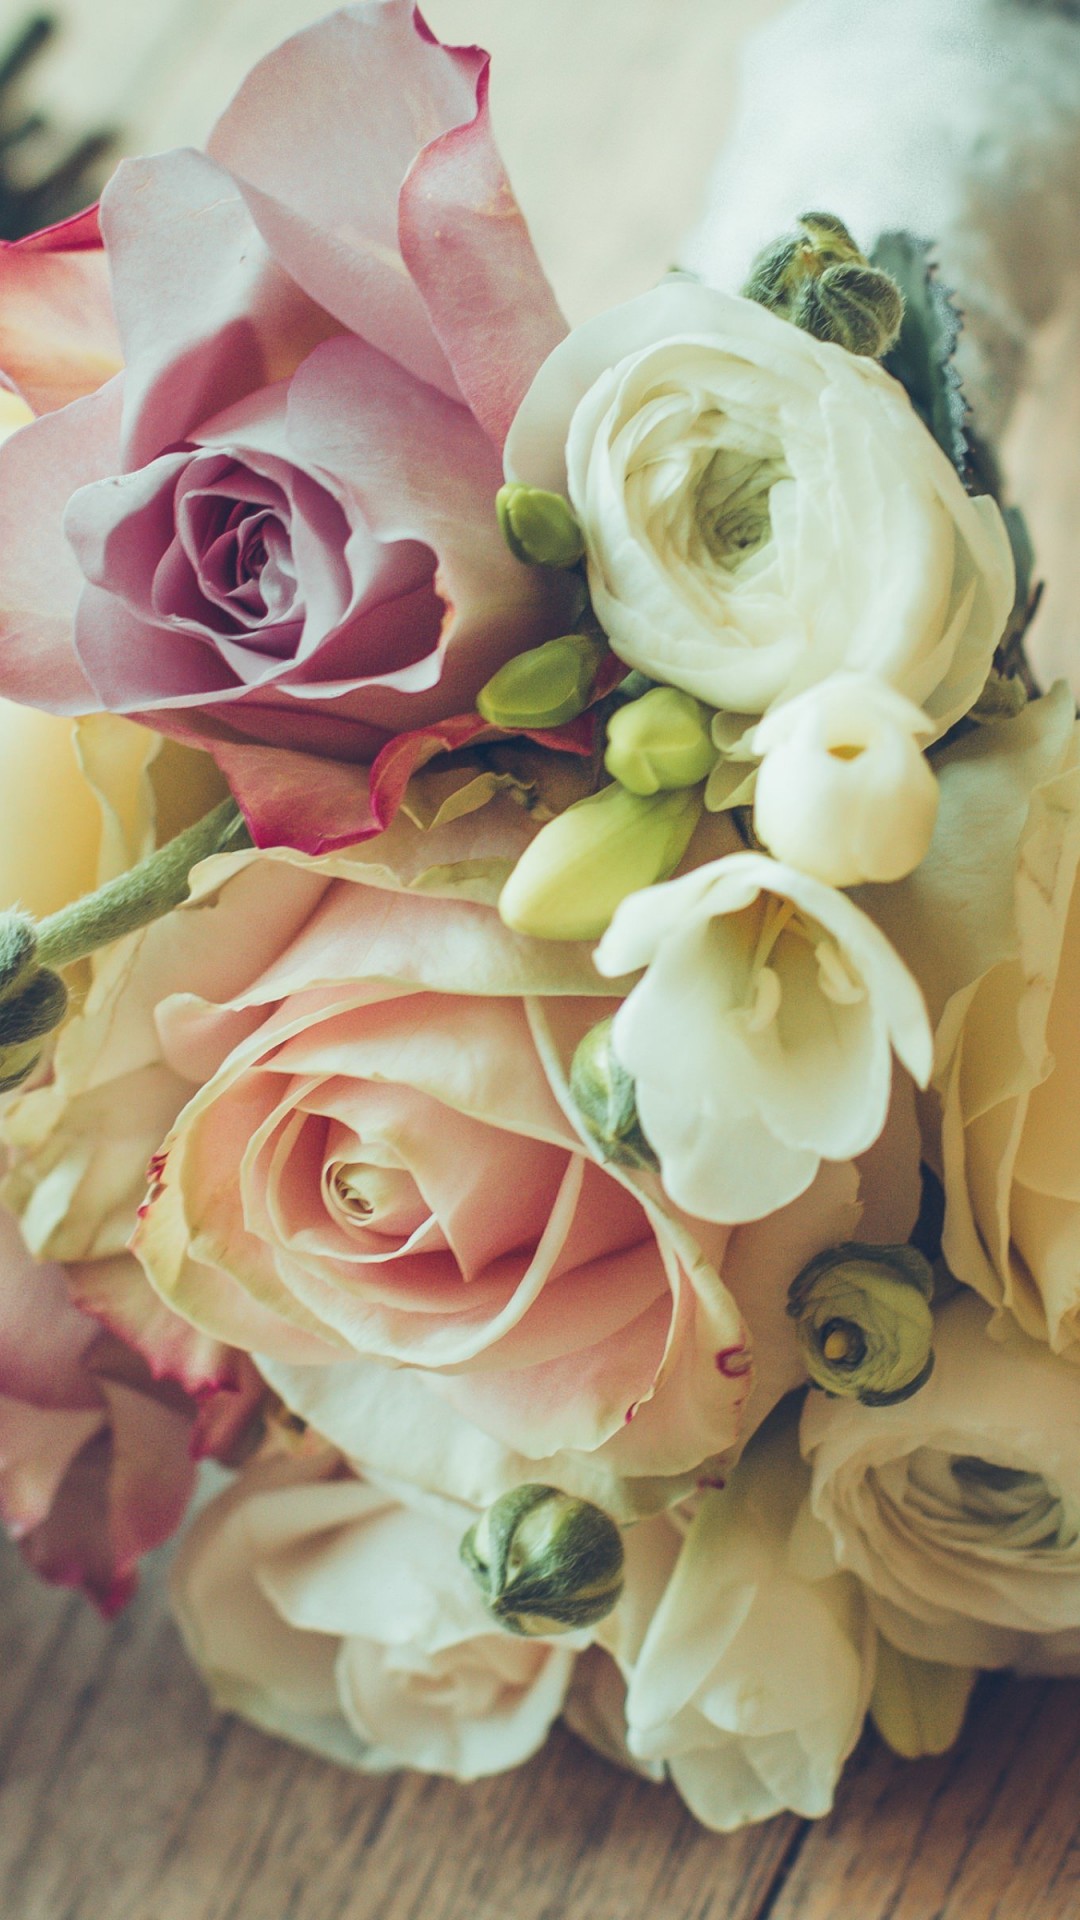 Roses Bouquet Composition Wallpaper for LG G2